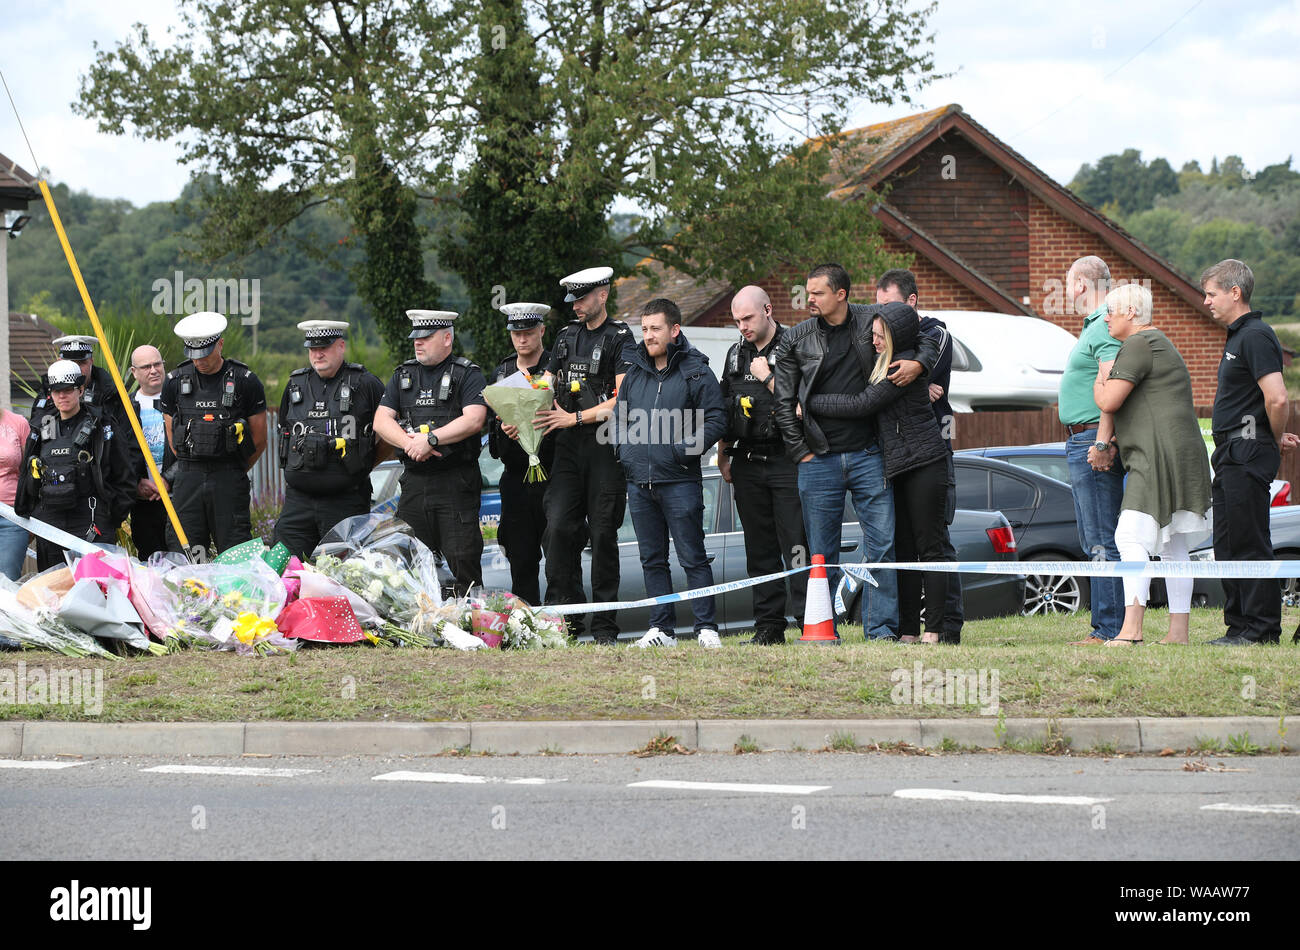 Members of the Thames Valley and Hampshire Roads Policing Team pay their respects in front of tributes at the scene near Ufton Lane, Sulhamstead, Berkshire, where Thames Valley Police officer Pc Andrew Harper, 28, died following a 'serious incident' at about 11.30pm on Thursday near the A4 Bath Road, between Reading and Newbury, at the village of Sulhamstead in Berkshire. Stock Photo